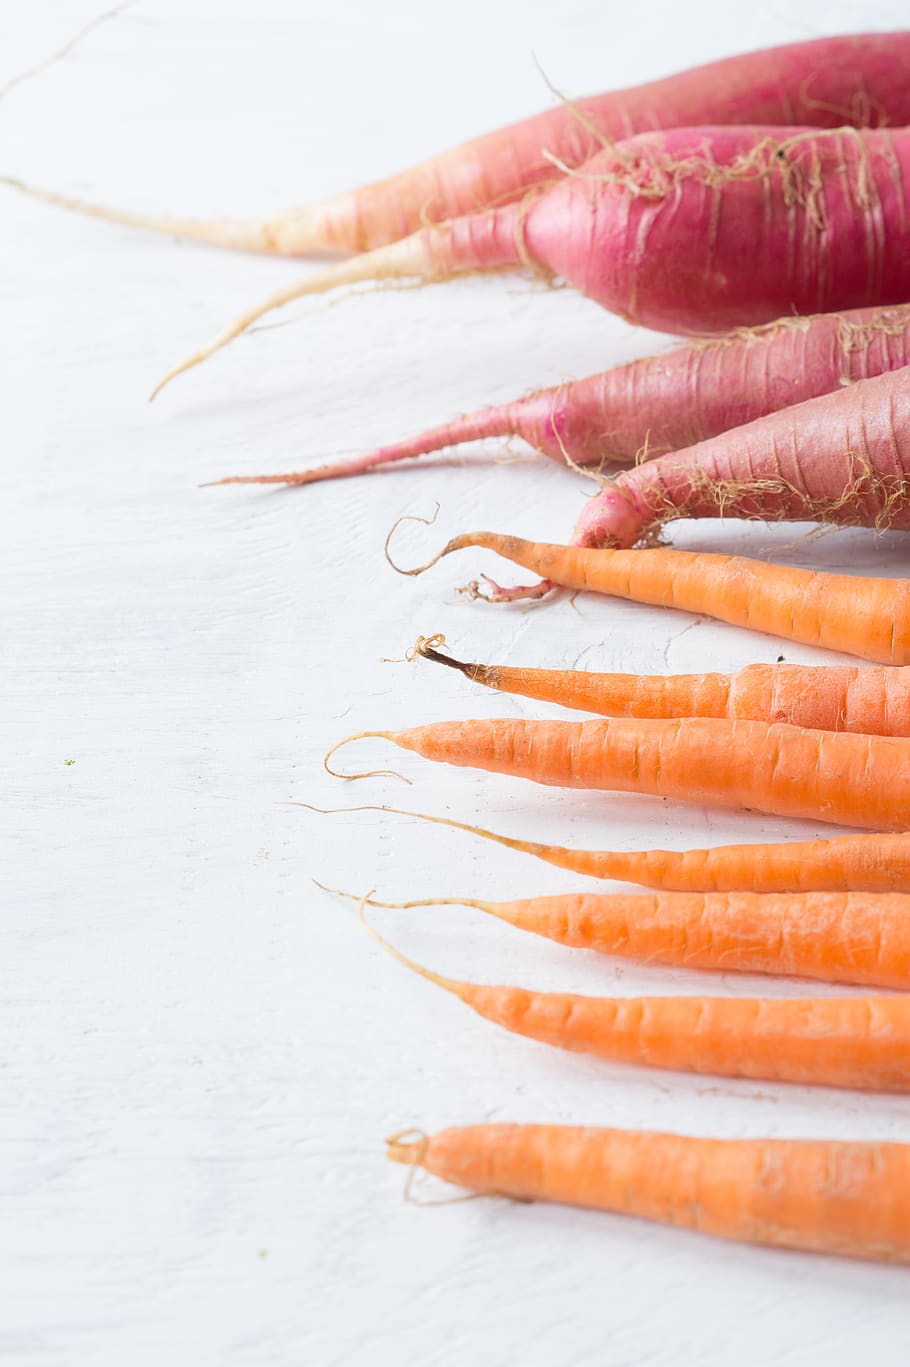 carrots, roots, background, radishes, orange, red, food, carrot, sano, nutrition